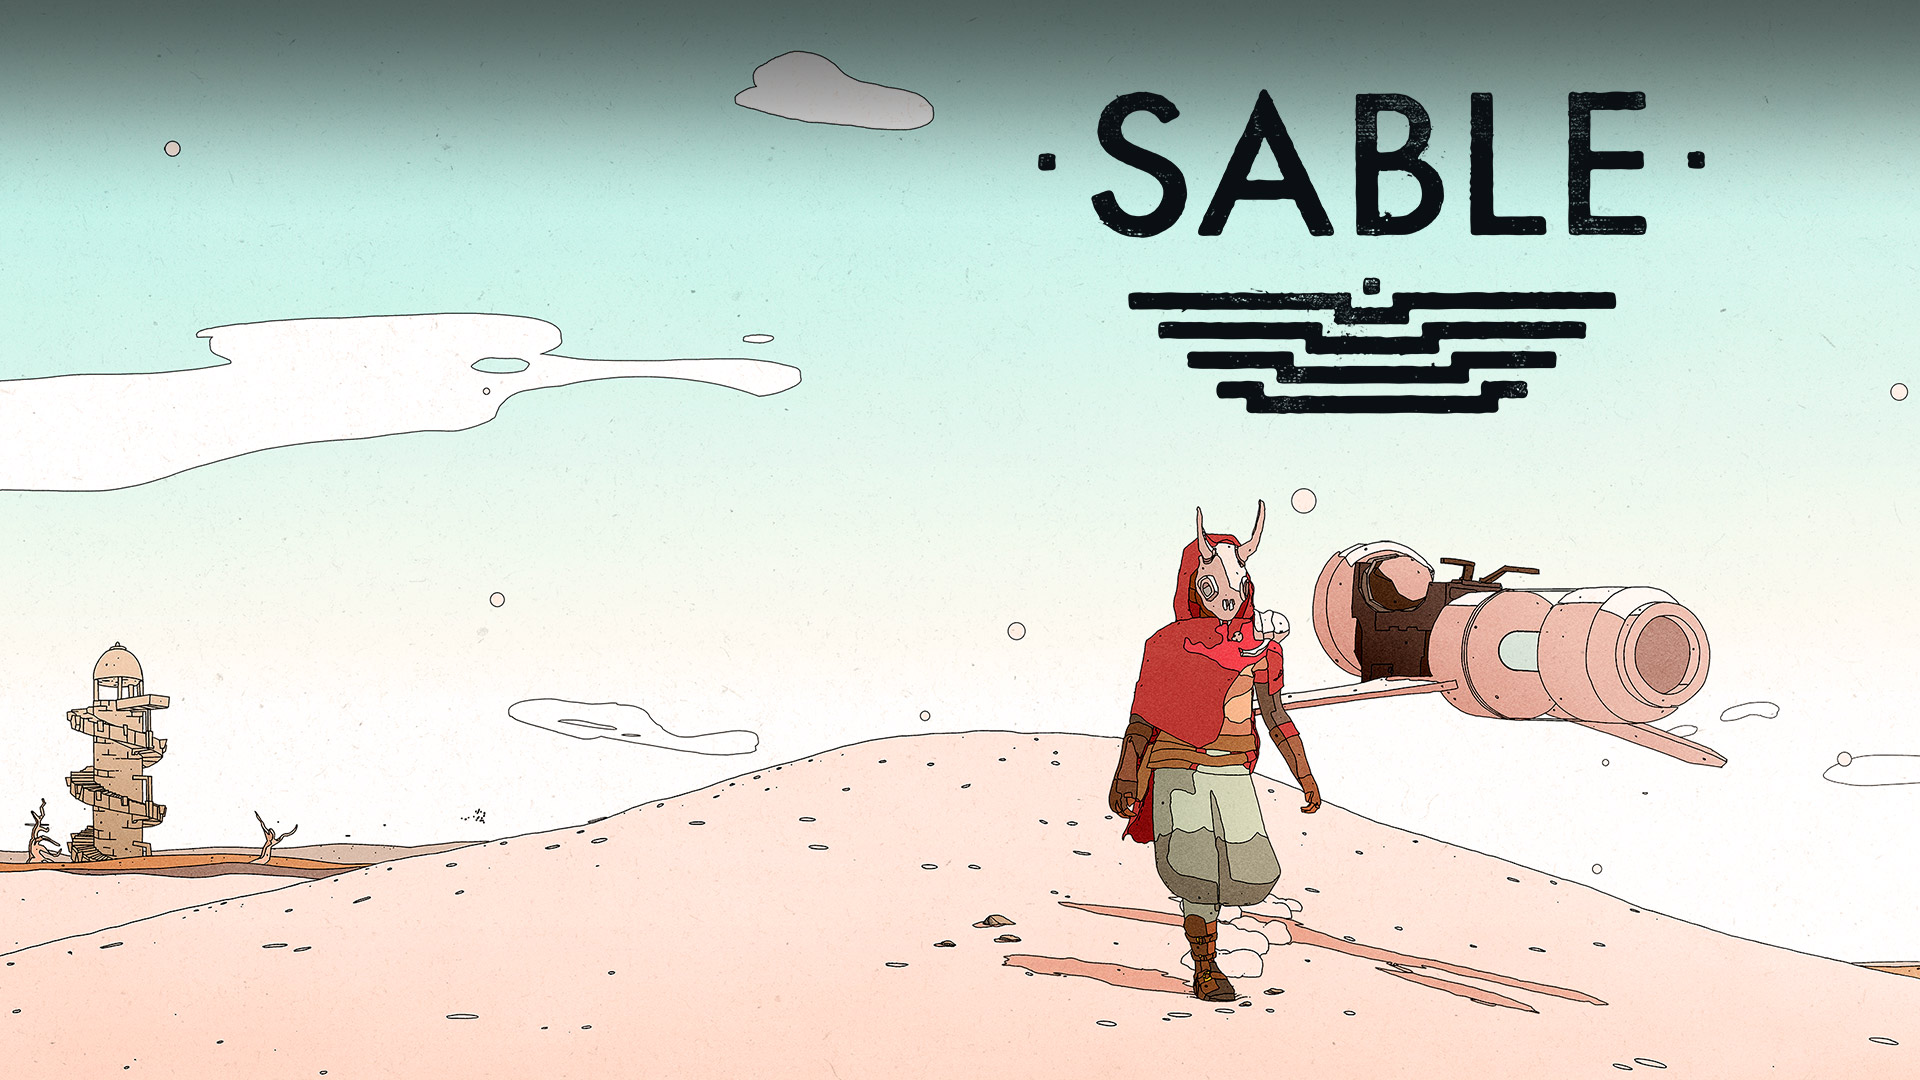 Sable logo, Sable in the desert with a hoverbike